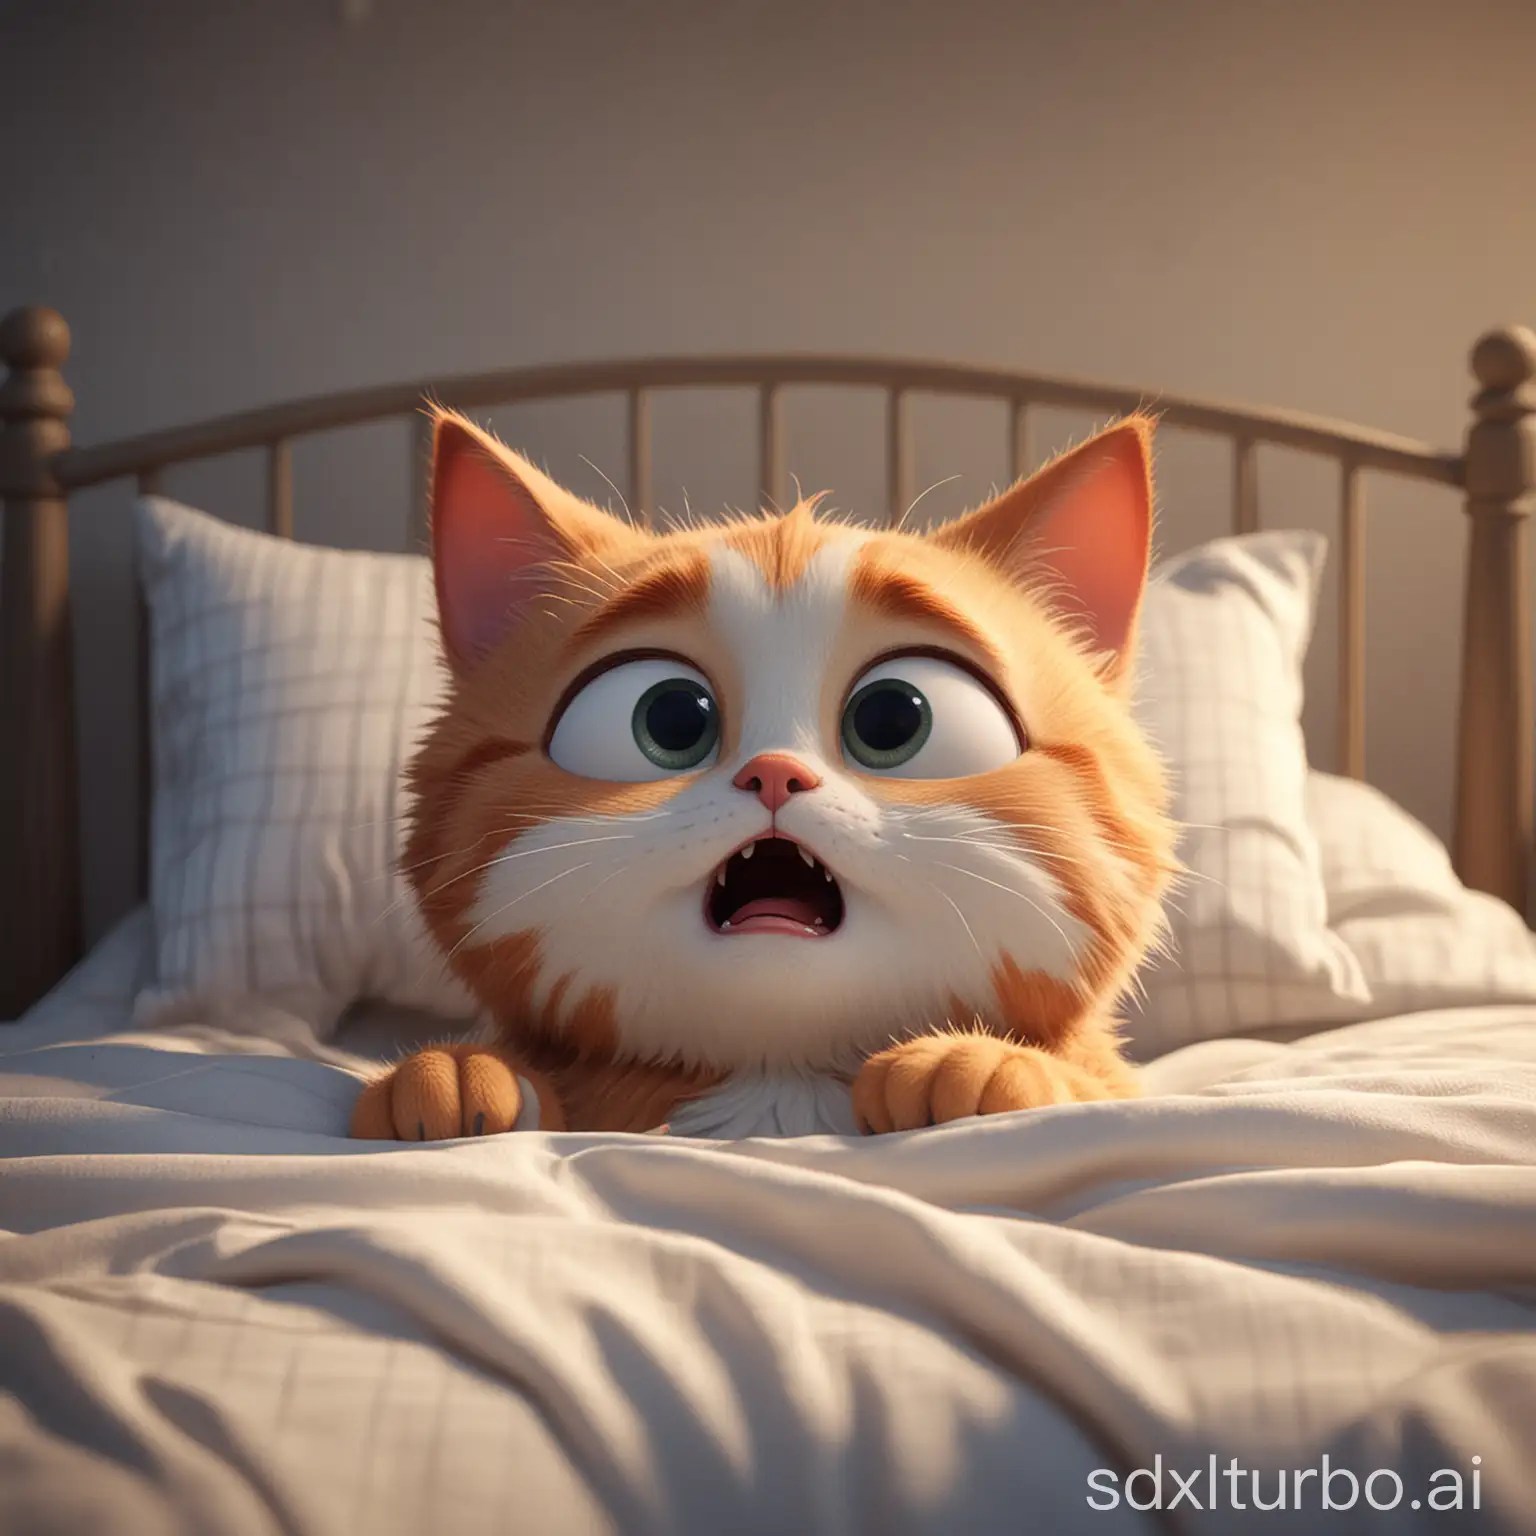 A cat crying in bed, anthropomorphic, cute, Pixar style